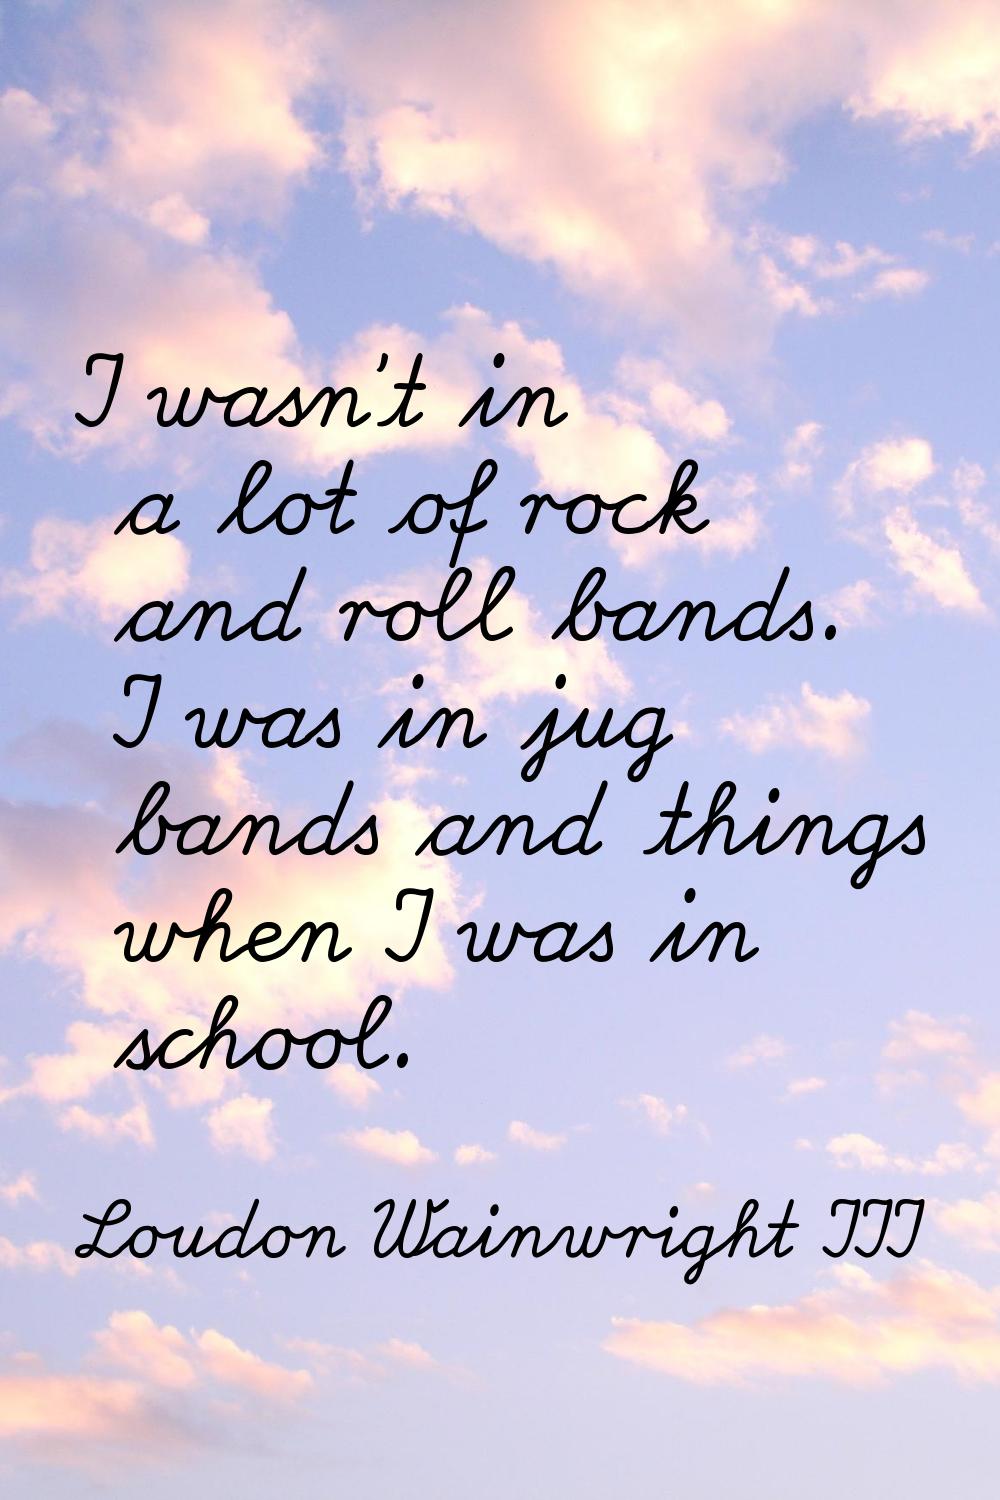 I wasn't in a lot of rock and roll bands. I was in jug bands and things when I was in school.